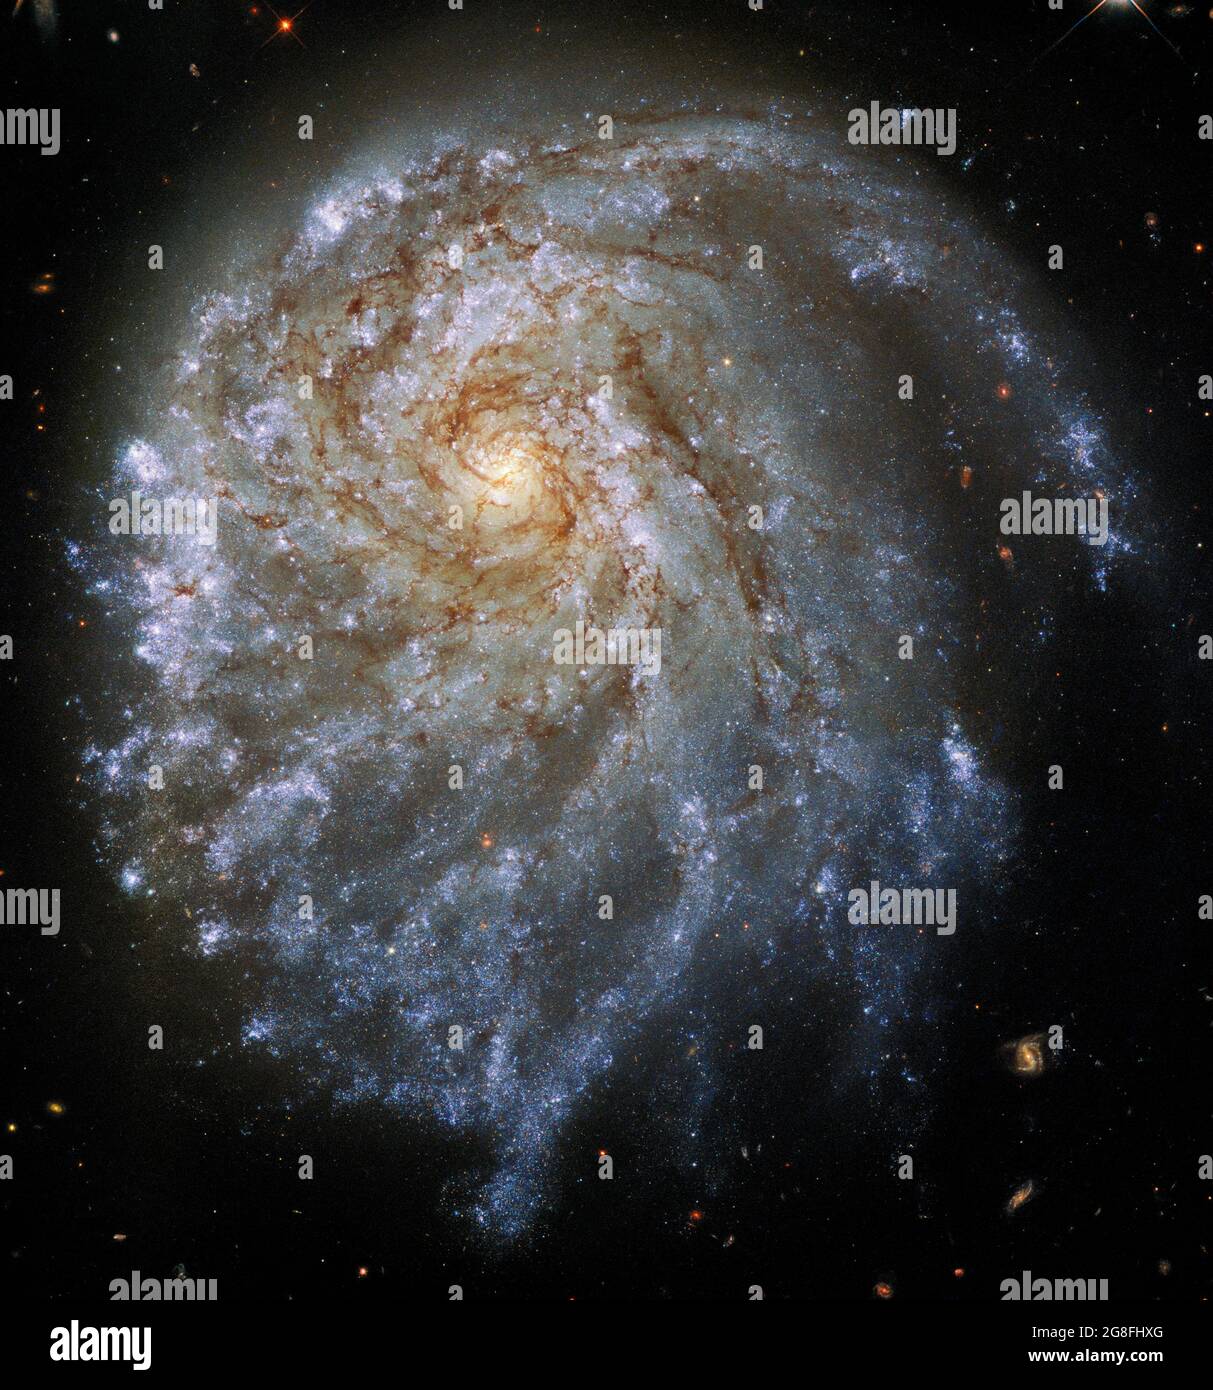 GALAXY NGC 2276 - 2021 - This spectacular image from the NASA/ESA Hubble Space Telescope shows the trailing arms of NGC 2276, a spiral galaxy 120 mill Stock Photo